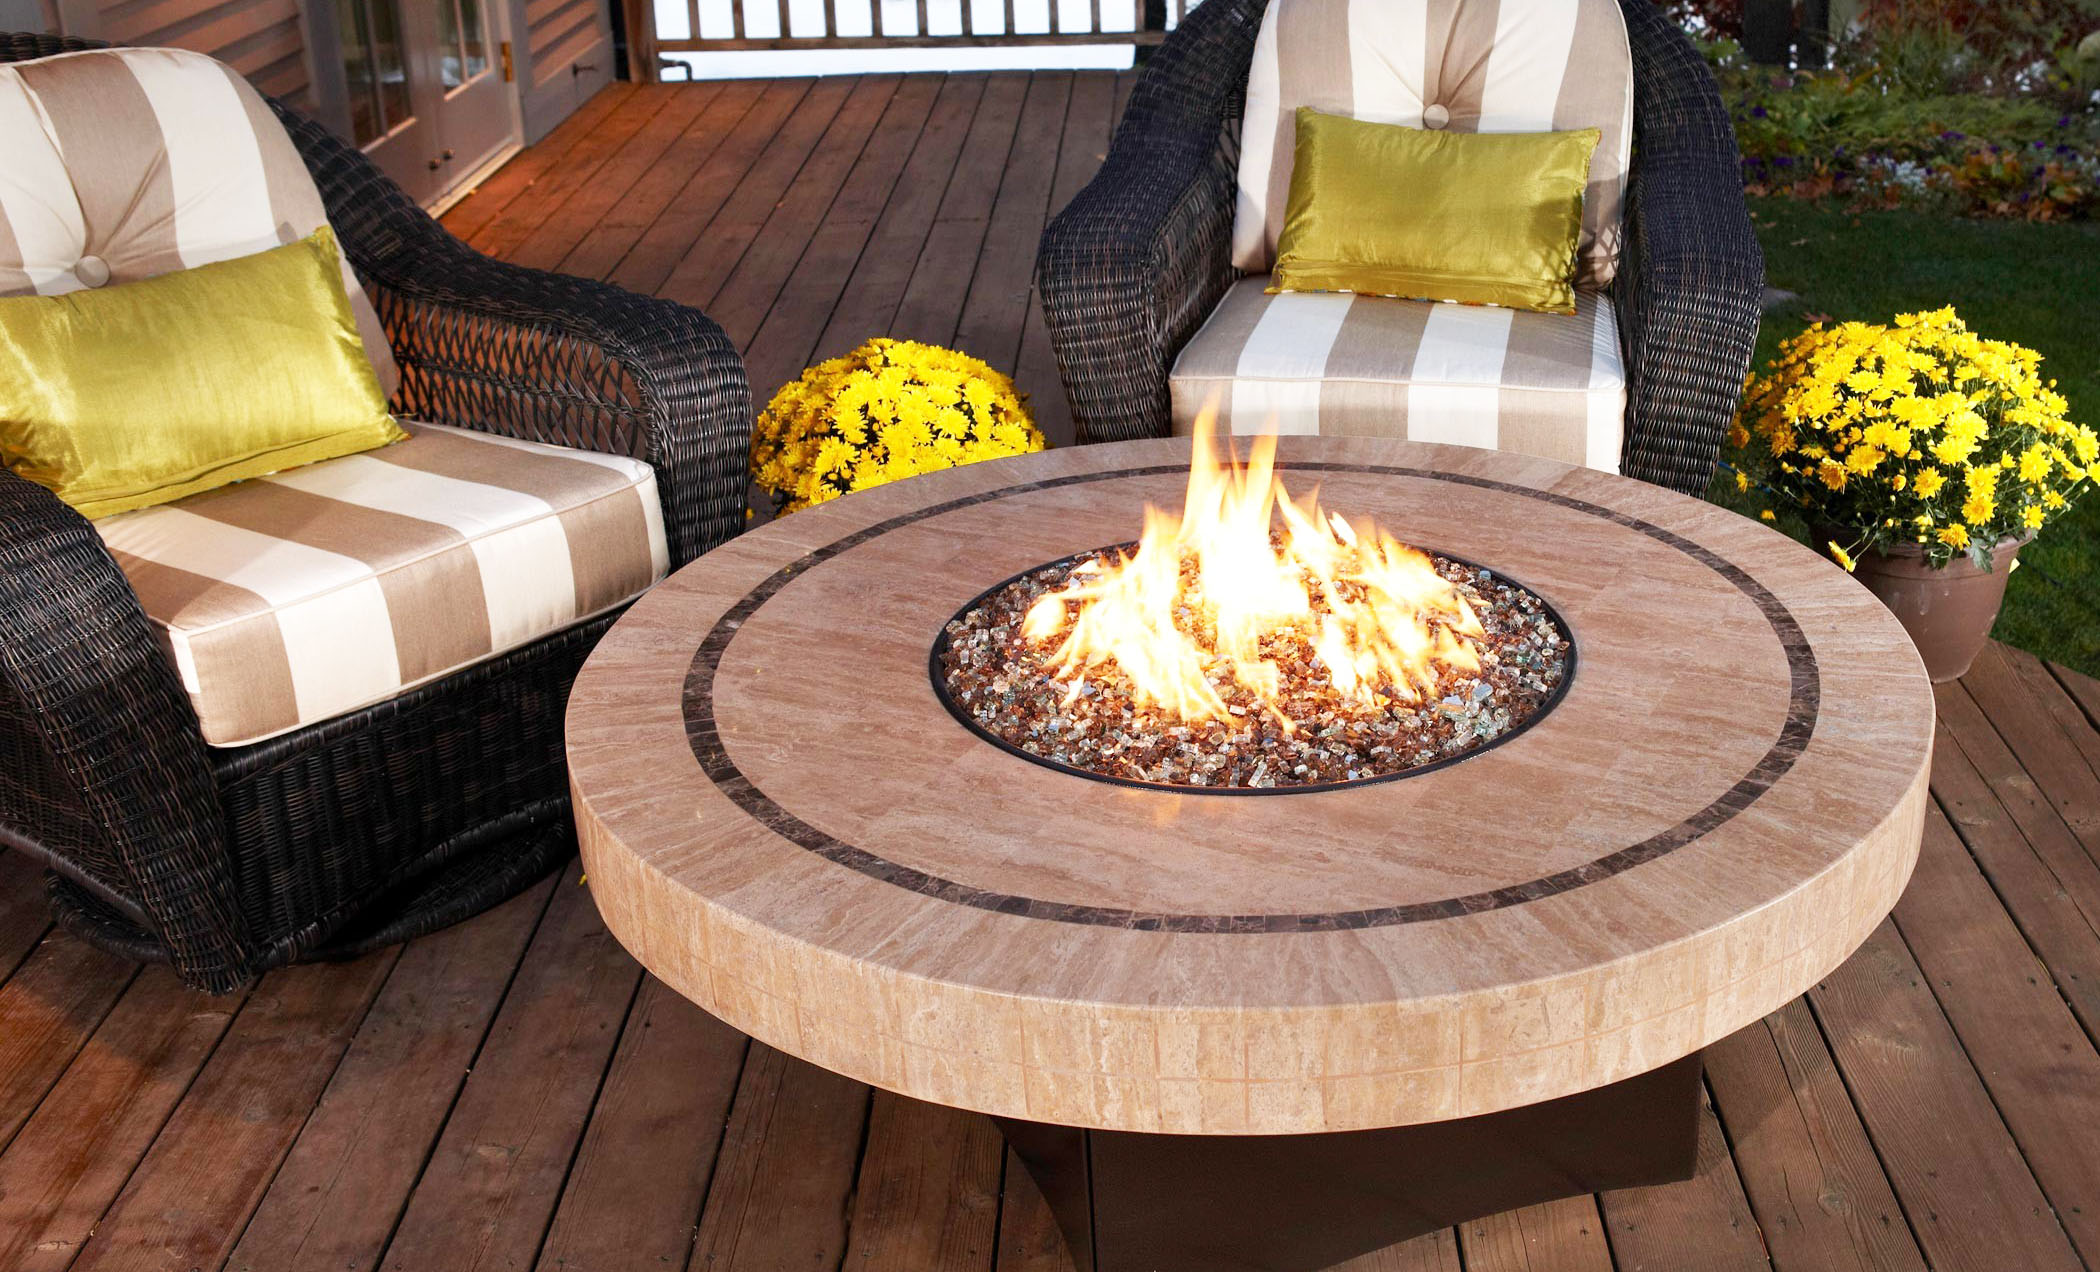 Tabletop Fire Pit Kit Diy How To Make, Diy Tabletop Gas Fire Pit